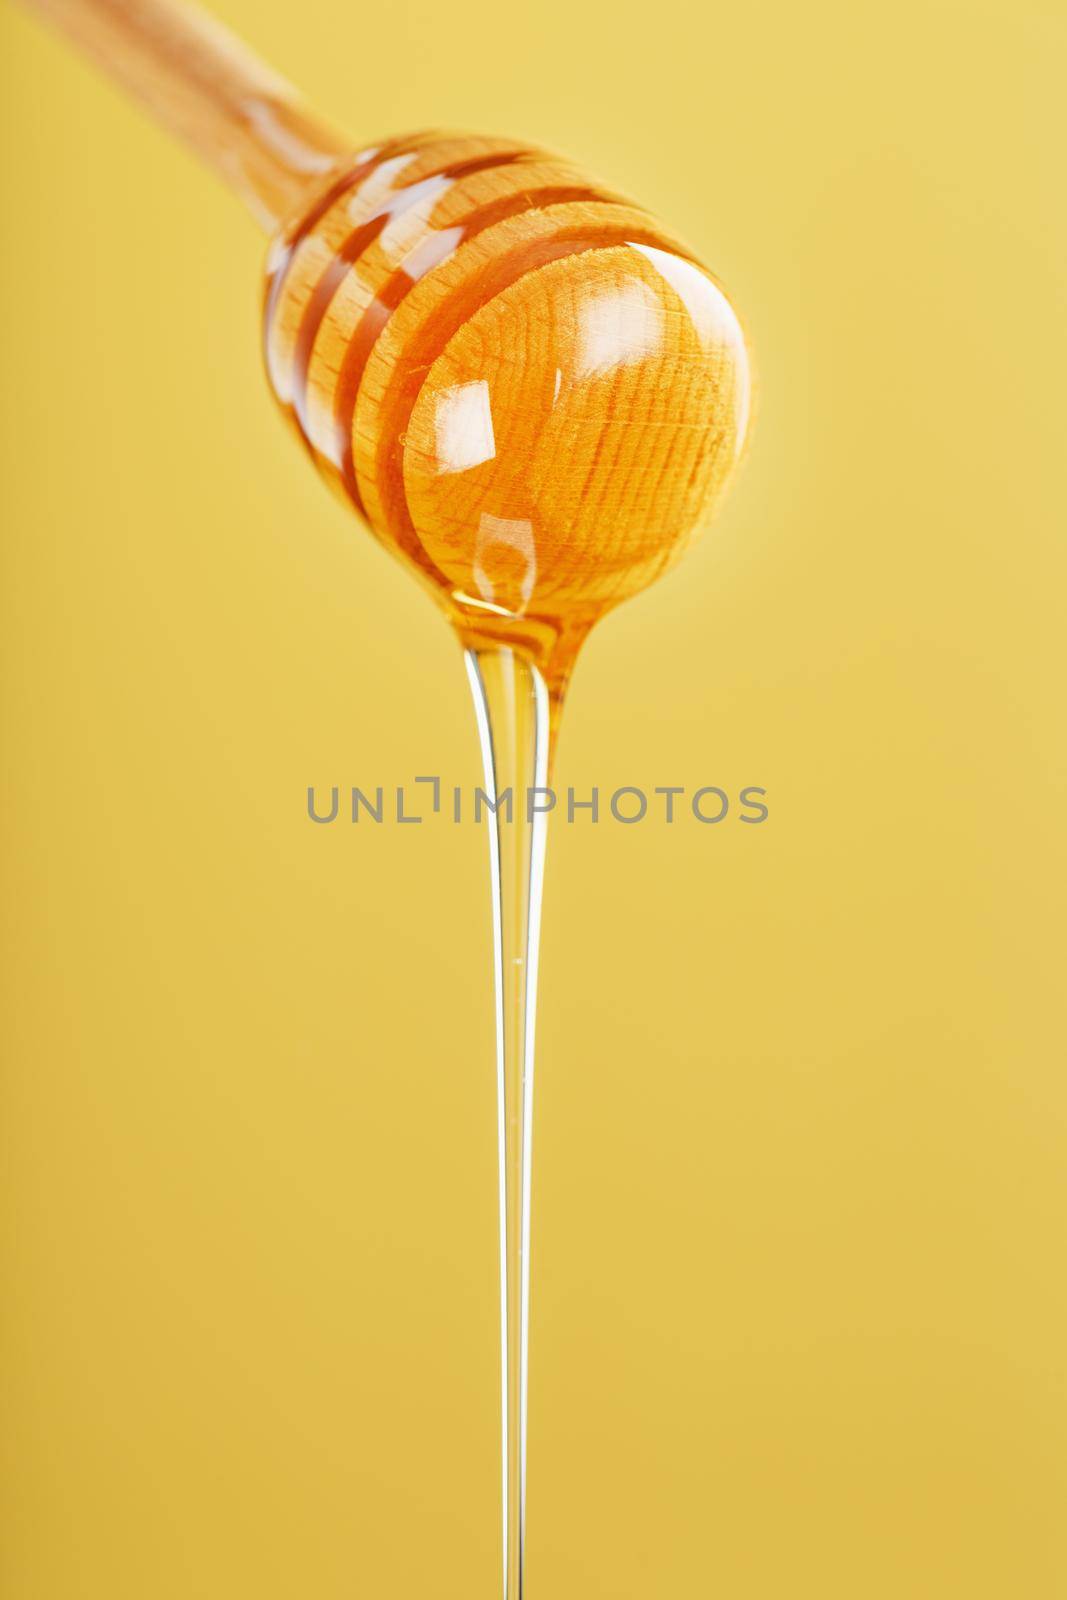 Golden honey trickles from a wooden honey dipper on a yellow background by AlexGrec